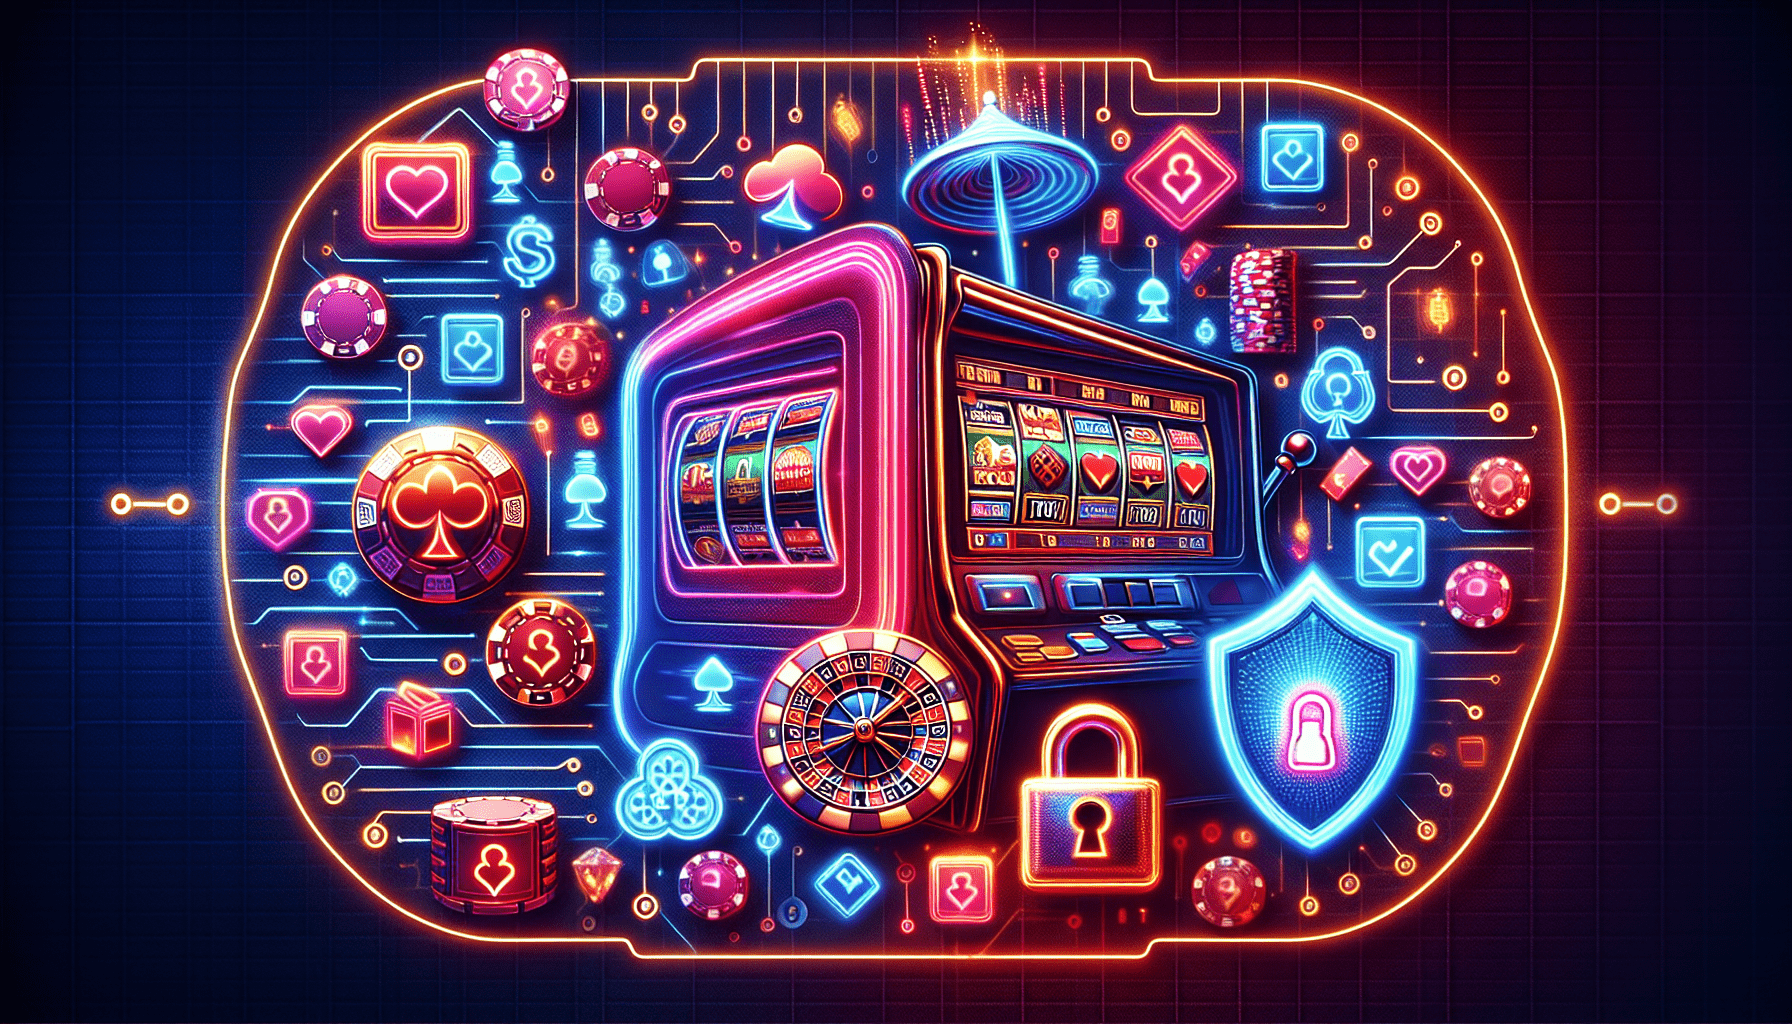 What Are Some Tips For Having Fun Safely At Online Casinos?